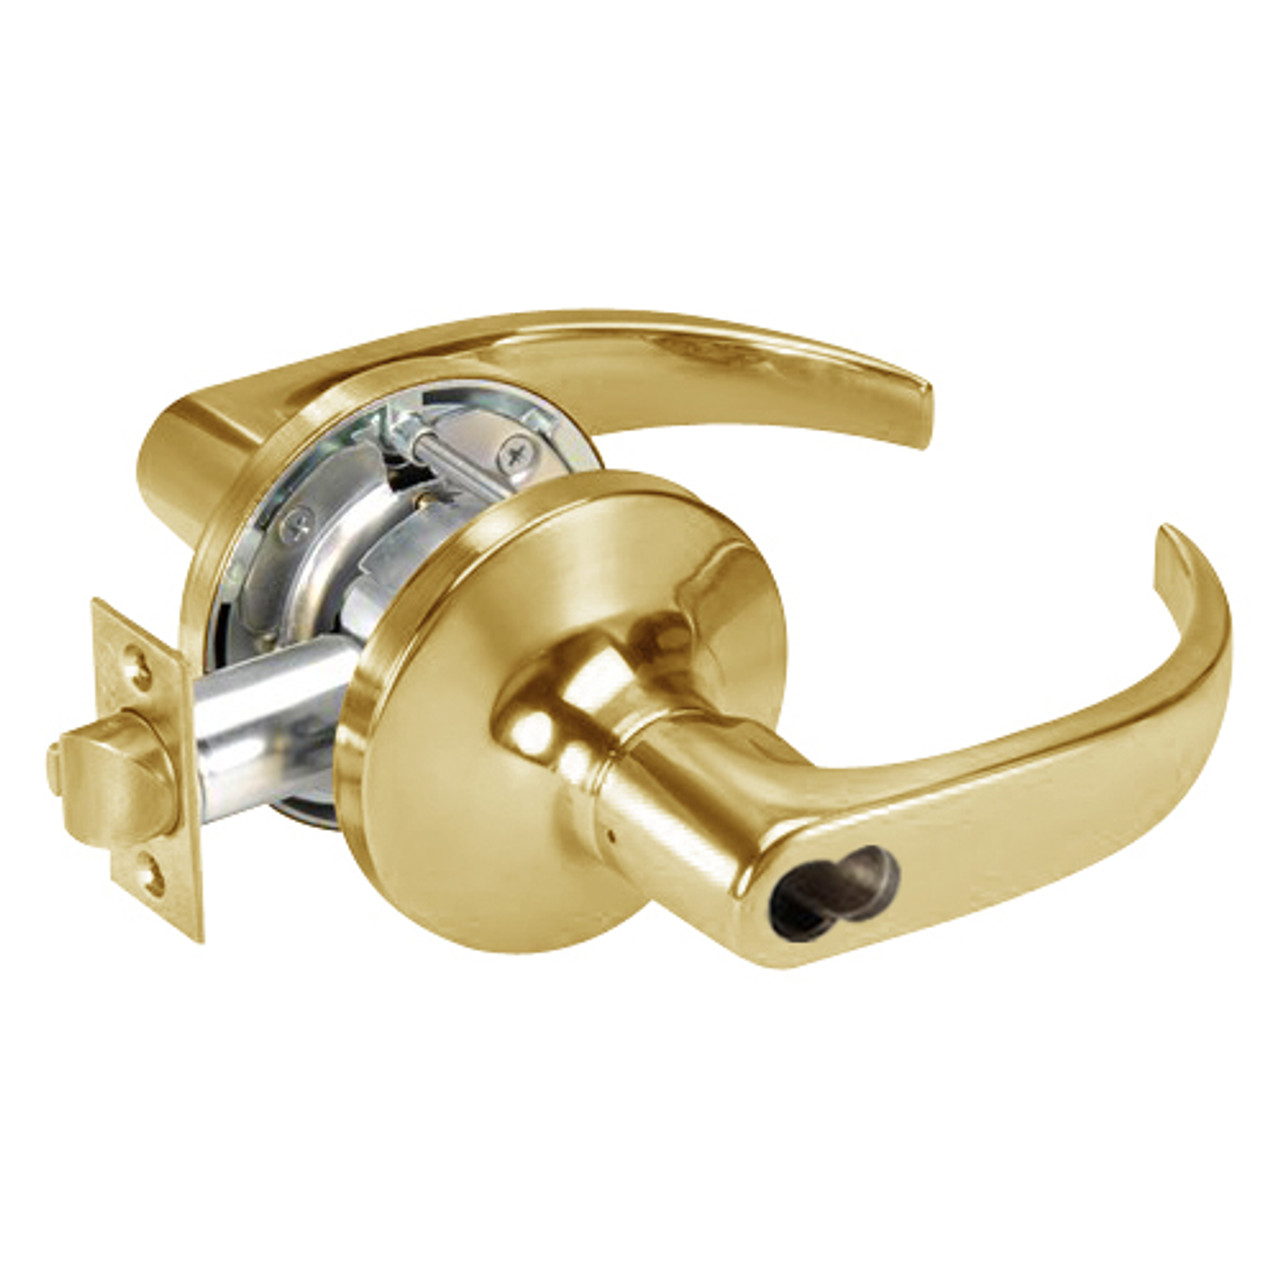 SI-PB5407LN-606 Yale 5400LN Series Single Cylinder Entry Cylindrical Locks with Pacific Beach Lever Prepped for Schlage IC Core in Satin Brass